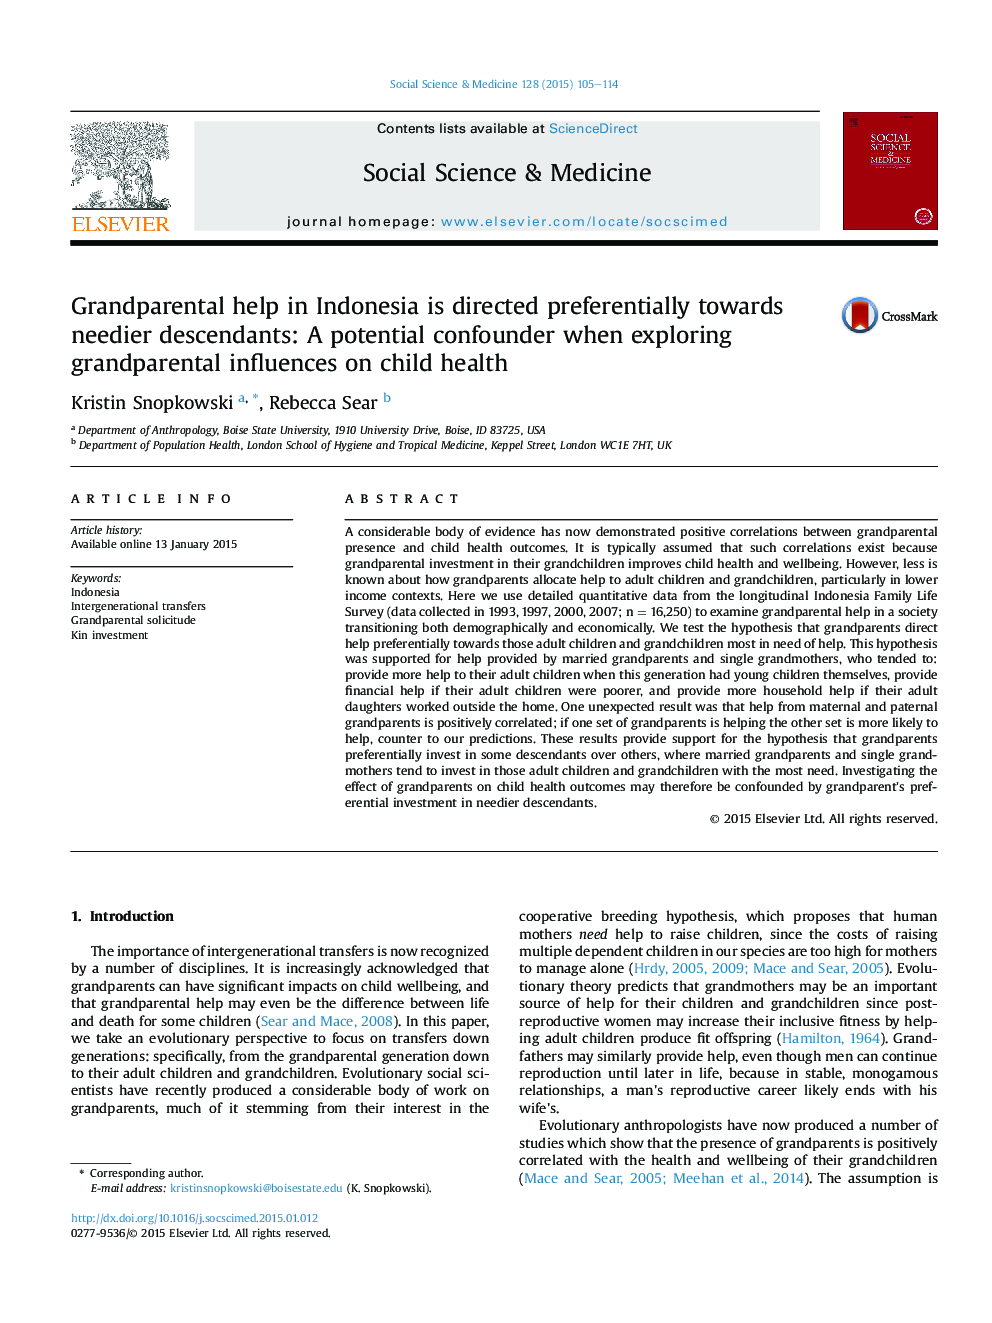 Grandparental help in Indonesia is directed preferentially towards needier descendants: A potential confounder when exploring grandparental influences on child health